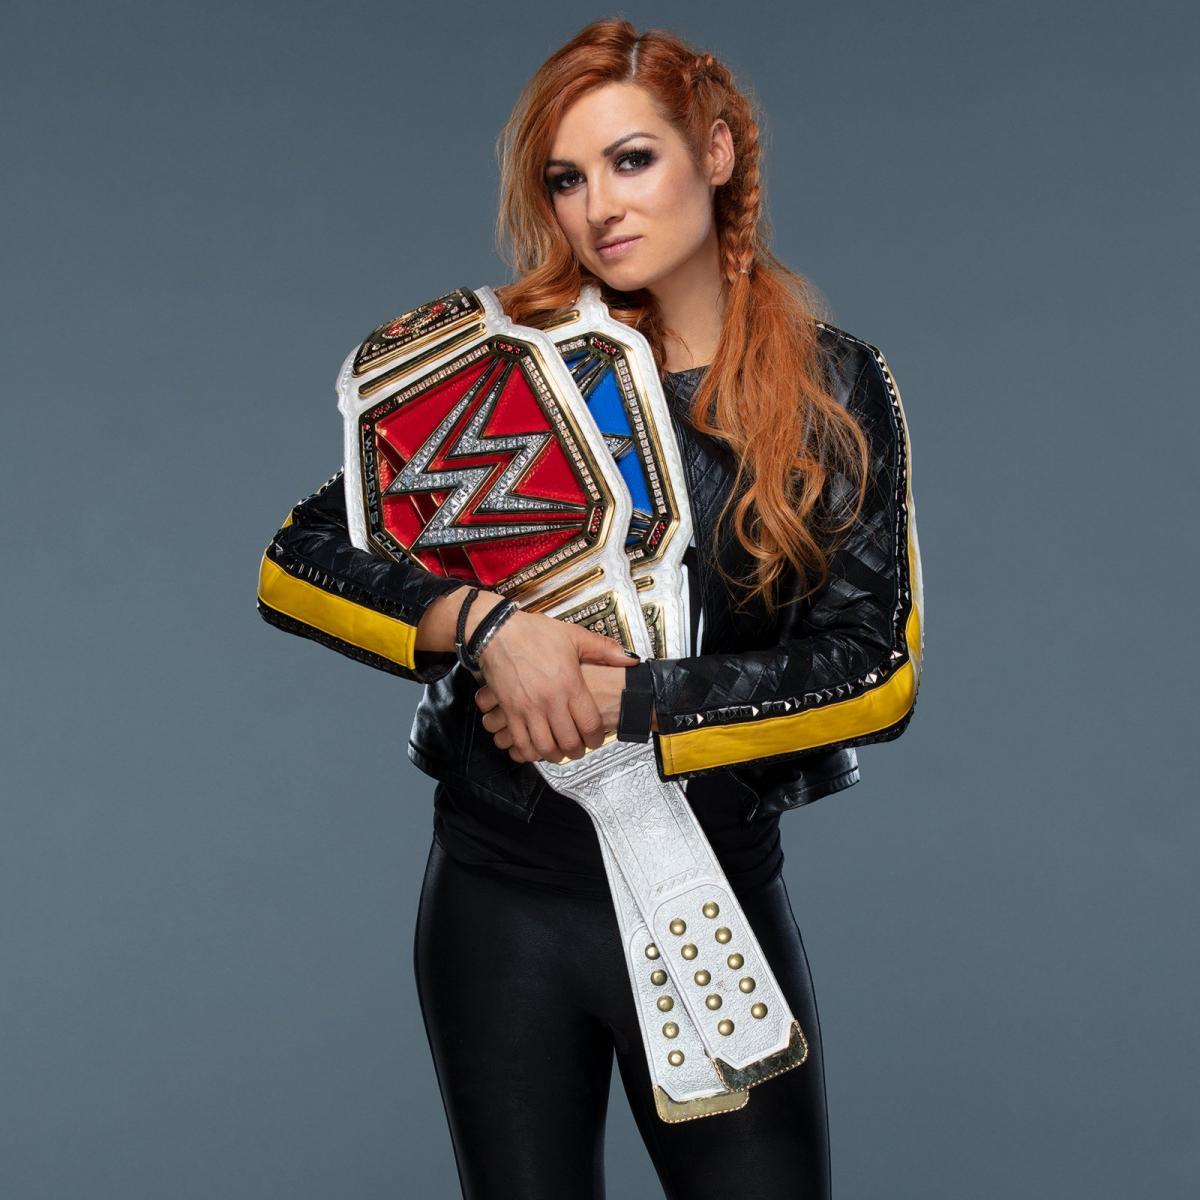 WWE's Becky Lynch Makes 'Jeopardy!' History by Going 0 for 60